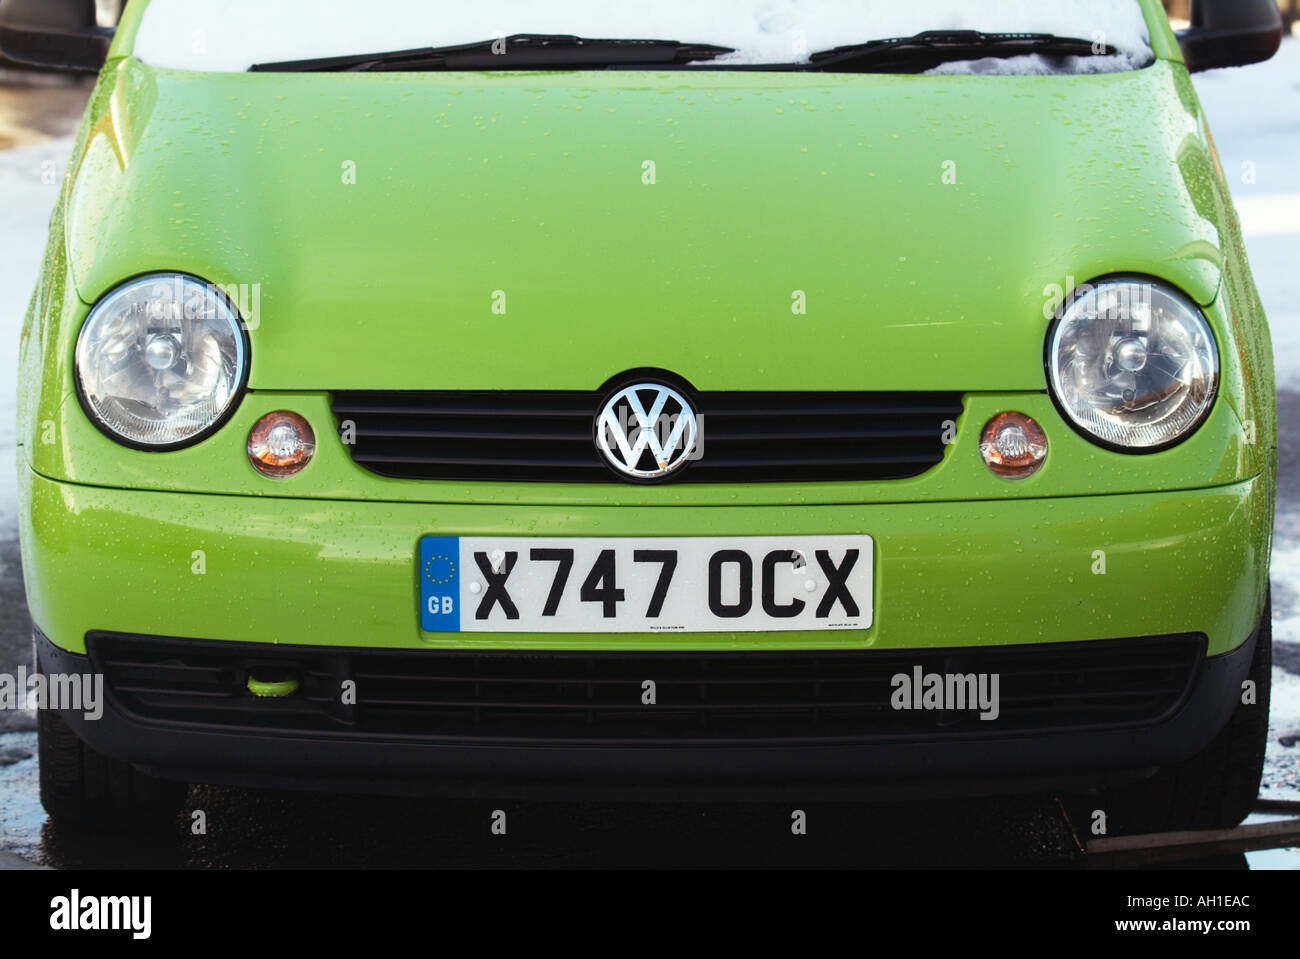 VW lupo city car volkswagen people car commute travel small green german car maker manufacturer germany Stock Photo